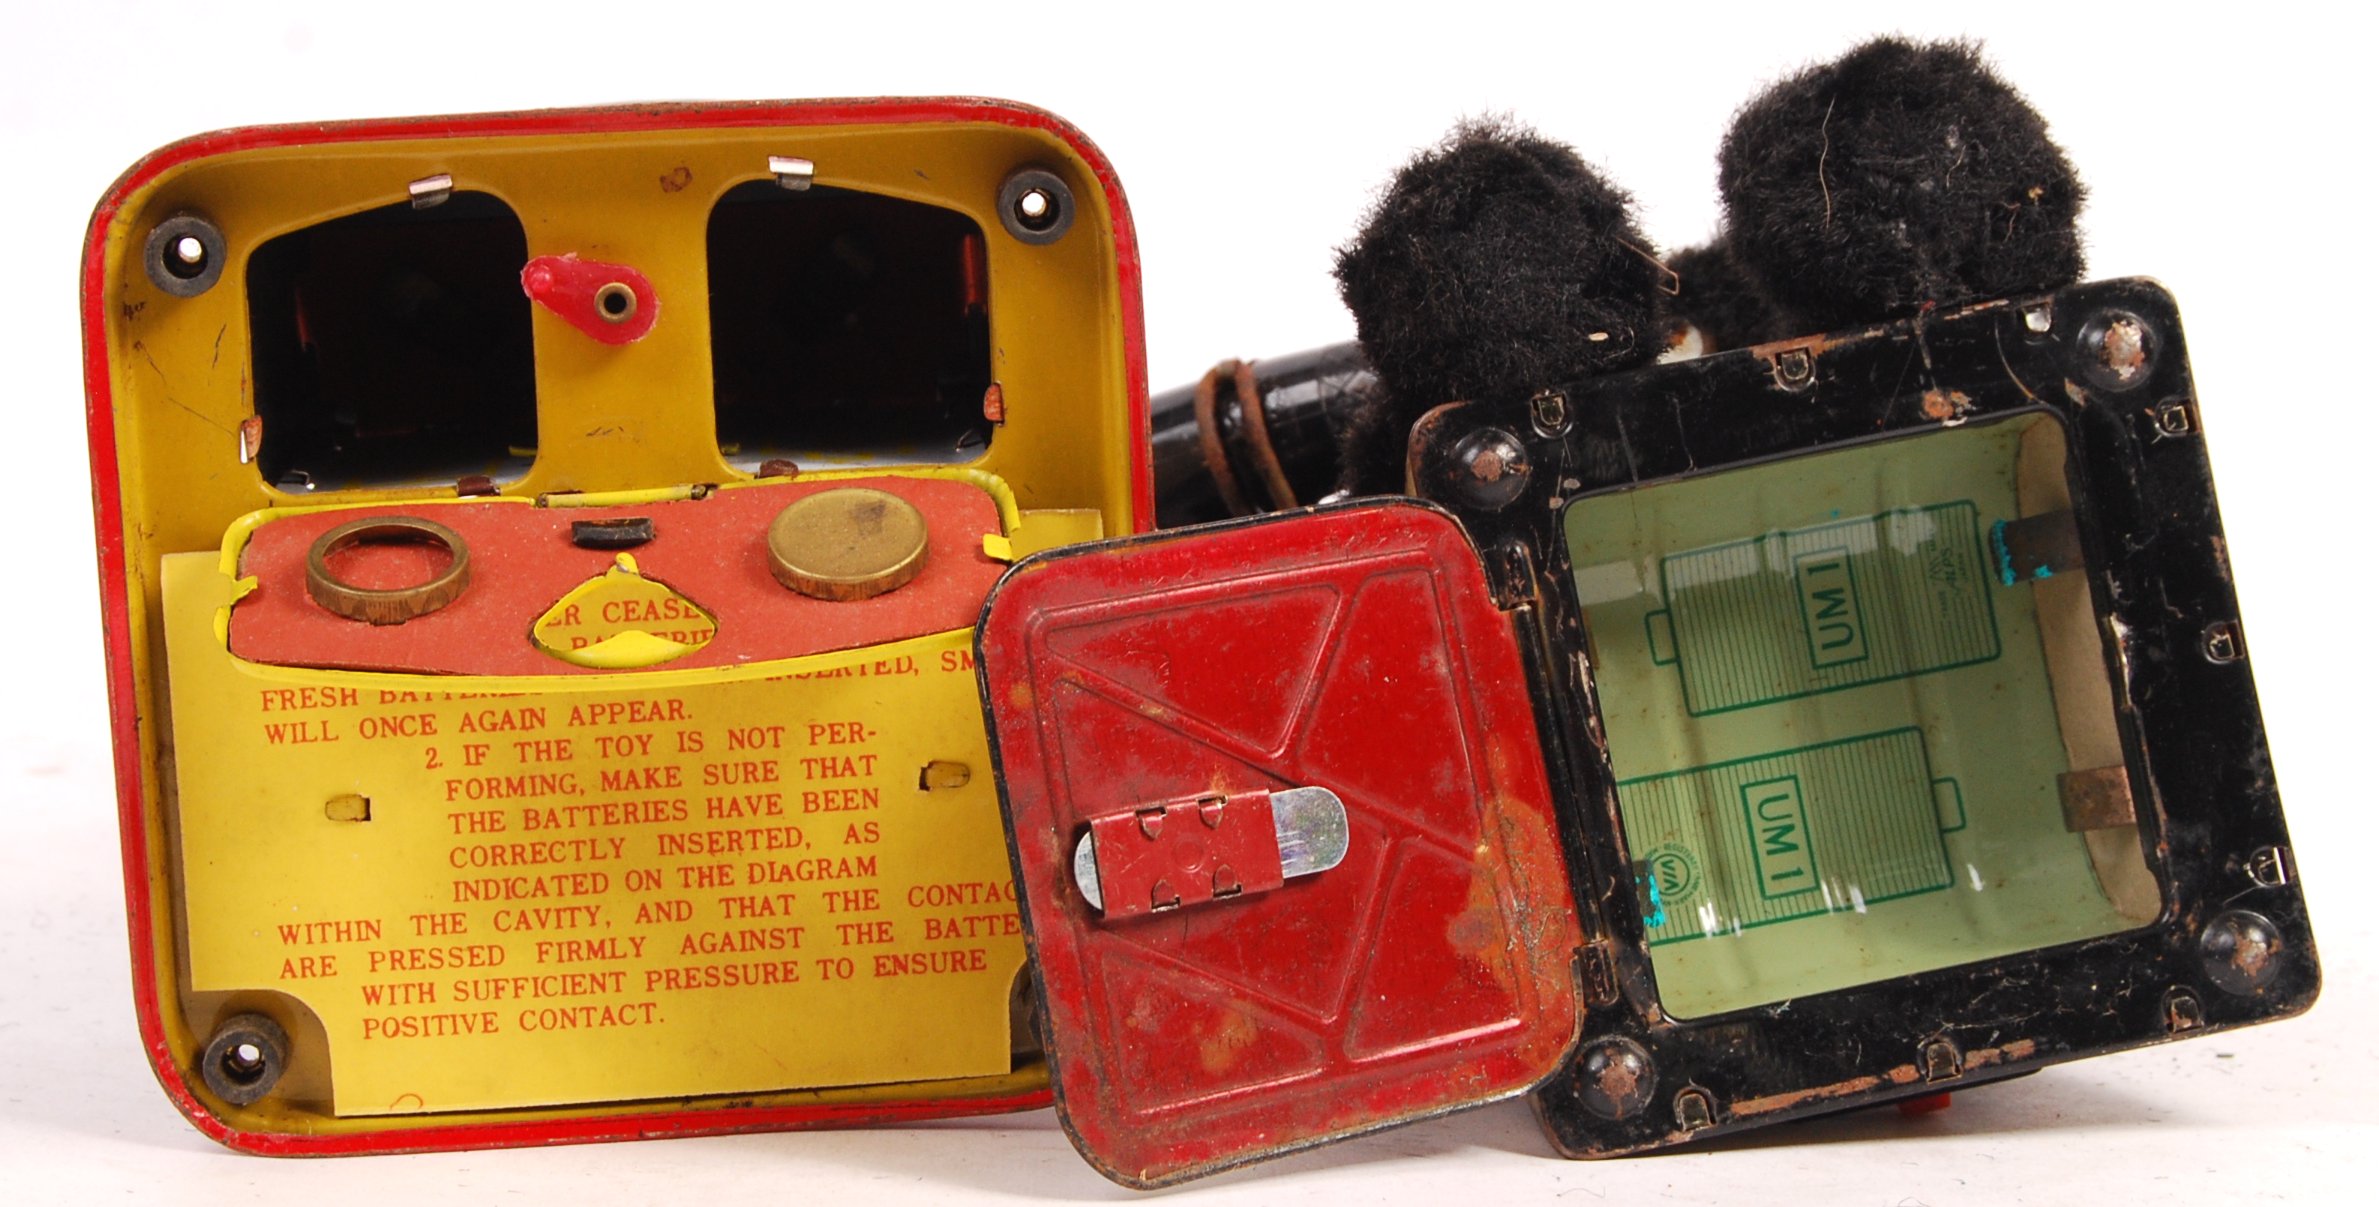 TWO RARE VINTAGE 1950'S TINPLATE MECHANICAL TOYS - Image 5 of 5